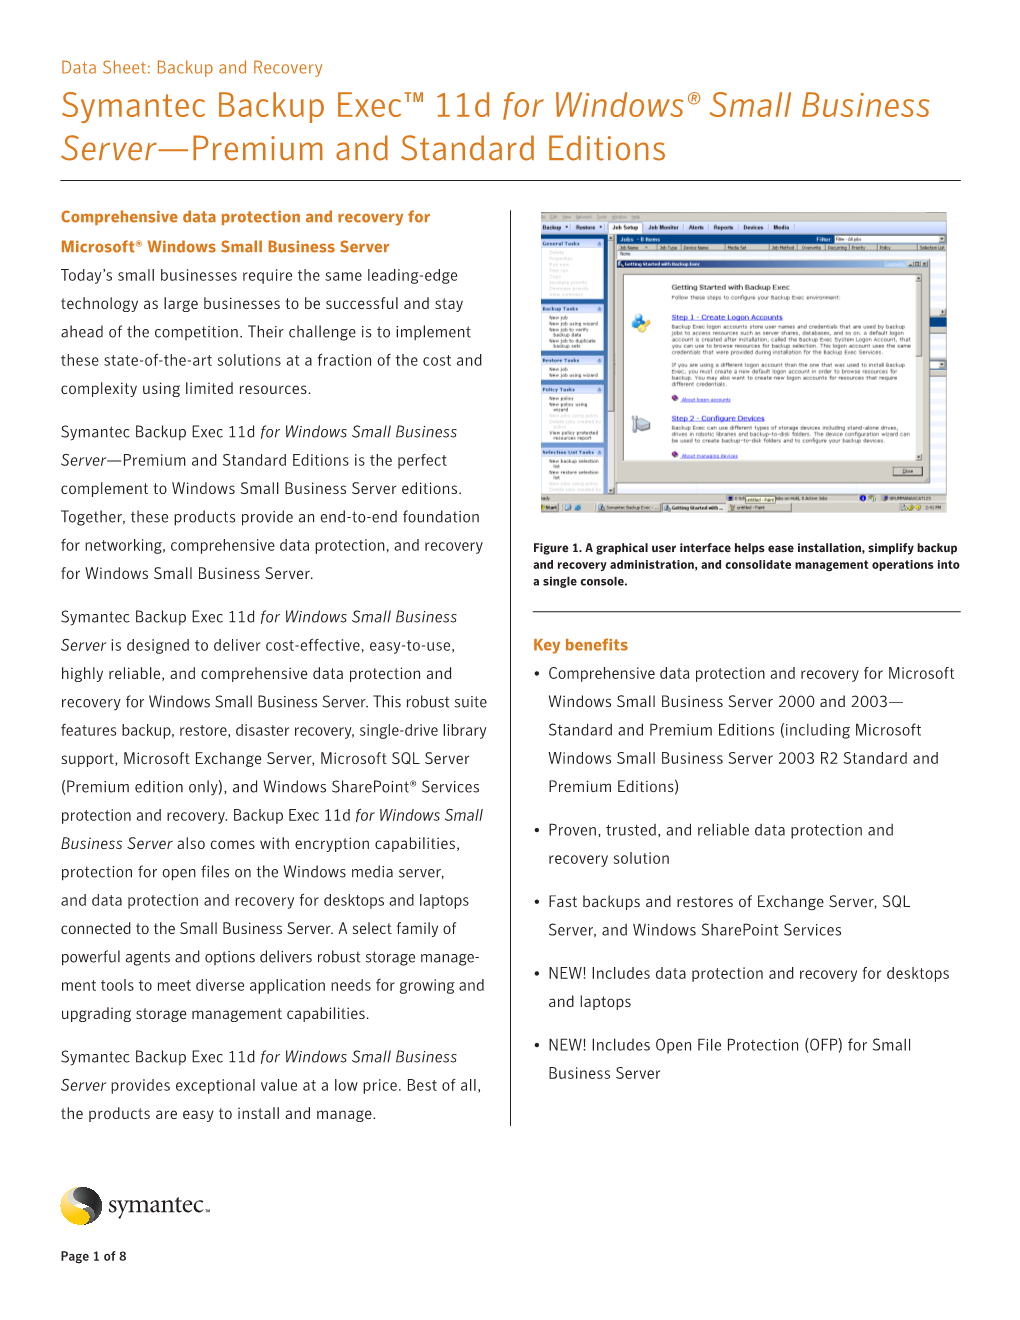 Symantec Backup Exec™ 11D for Windows® Small Business Server—Premium and Standard Editions